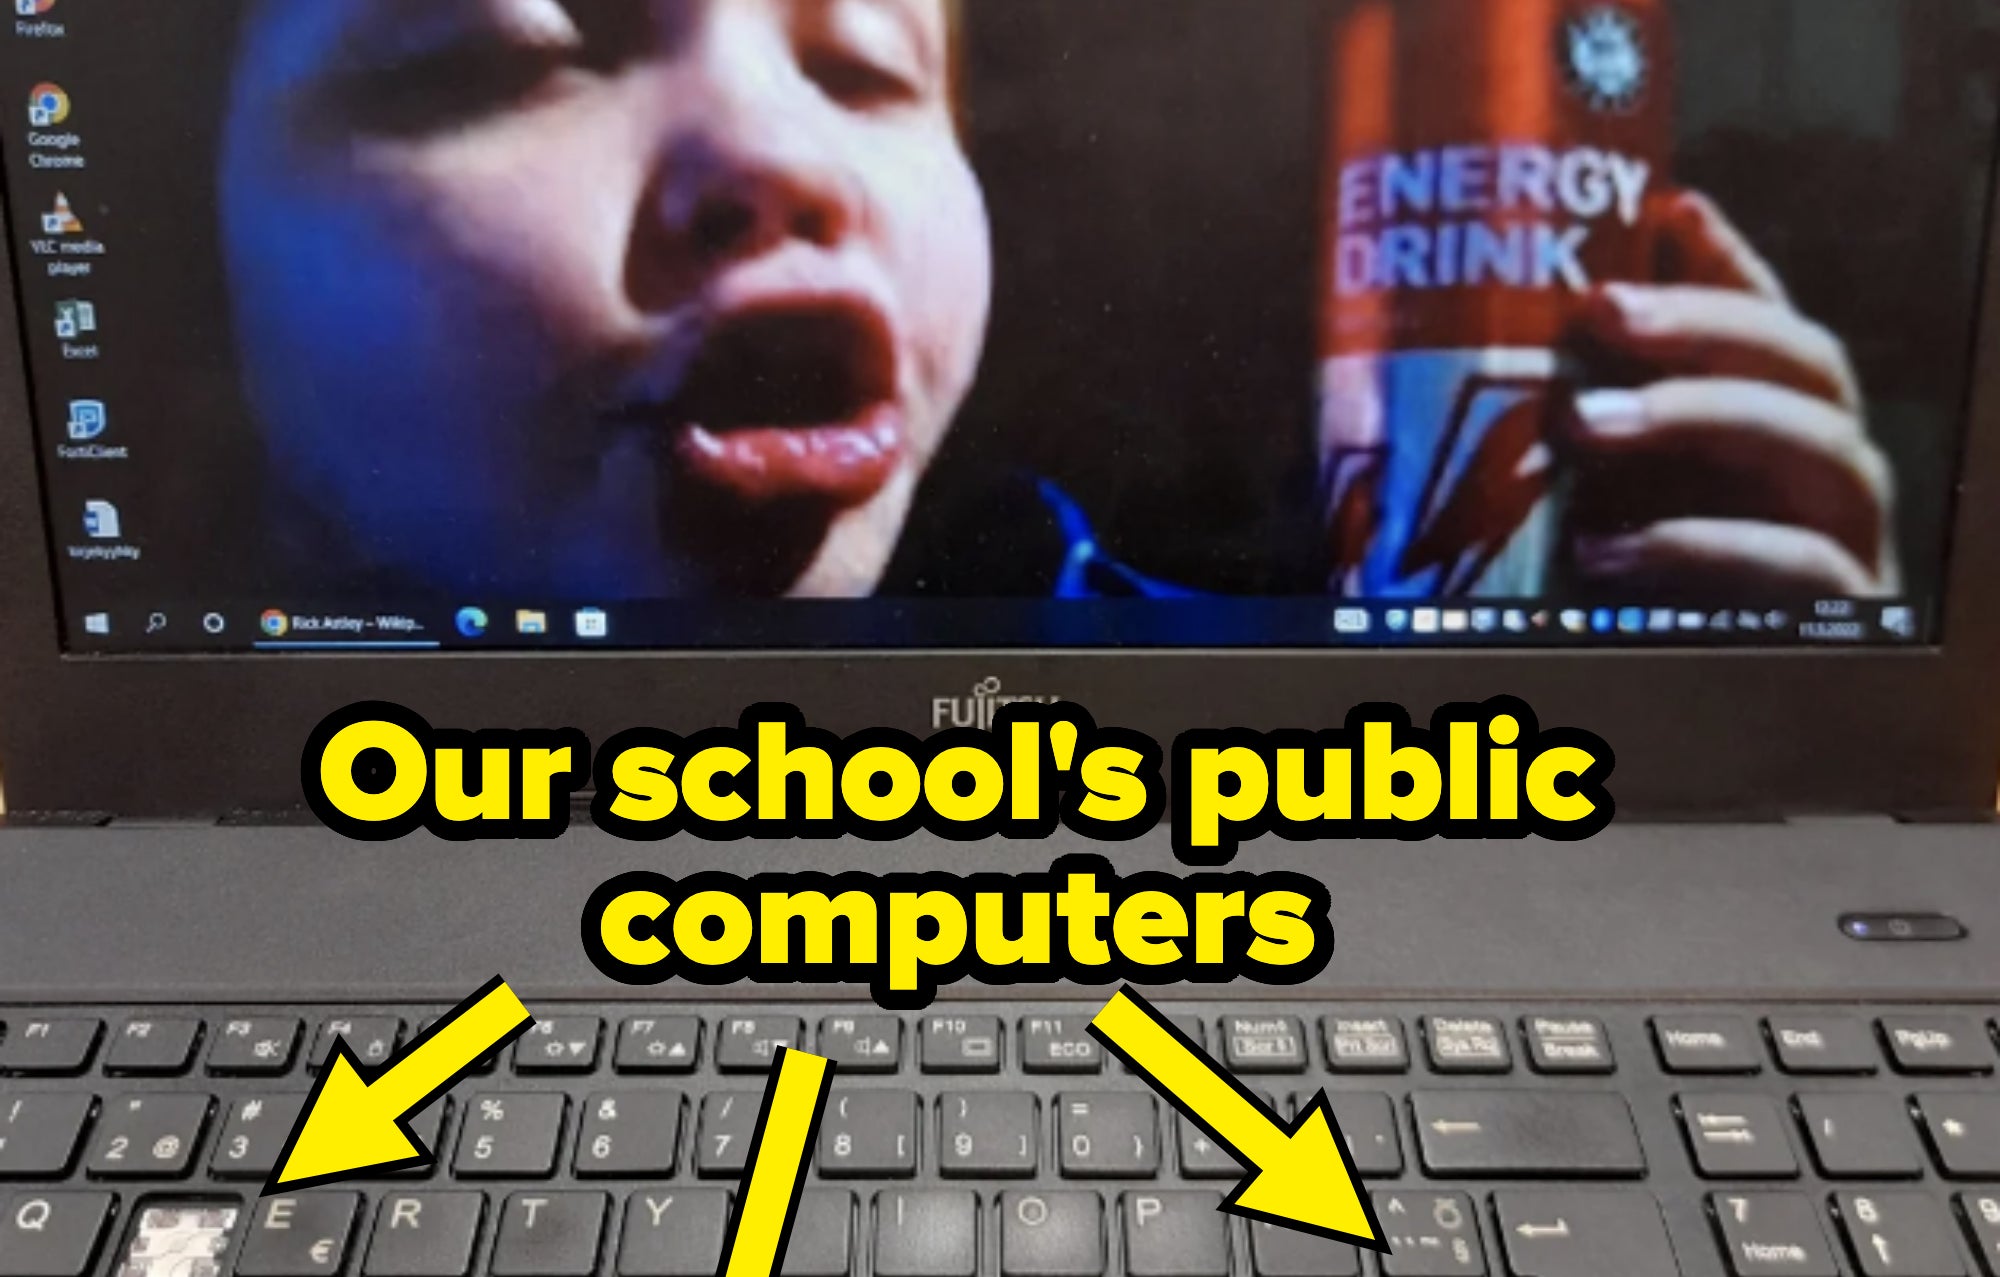 A child is seen on a Fujitsu laptop screen, holding an energy drink can and making a playful face